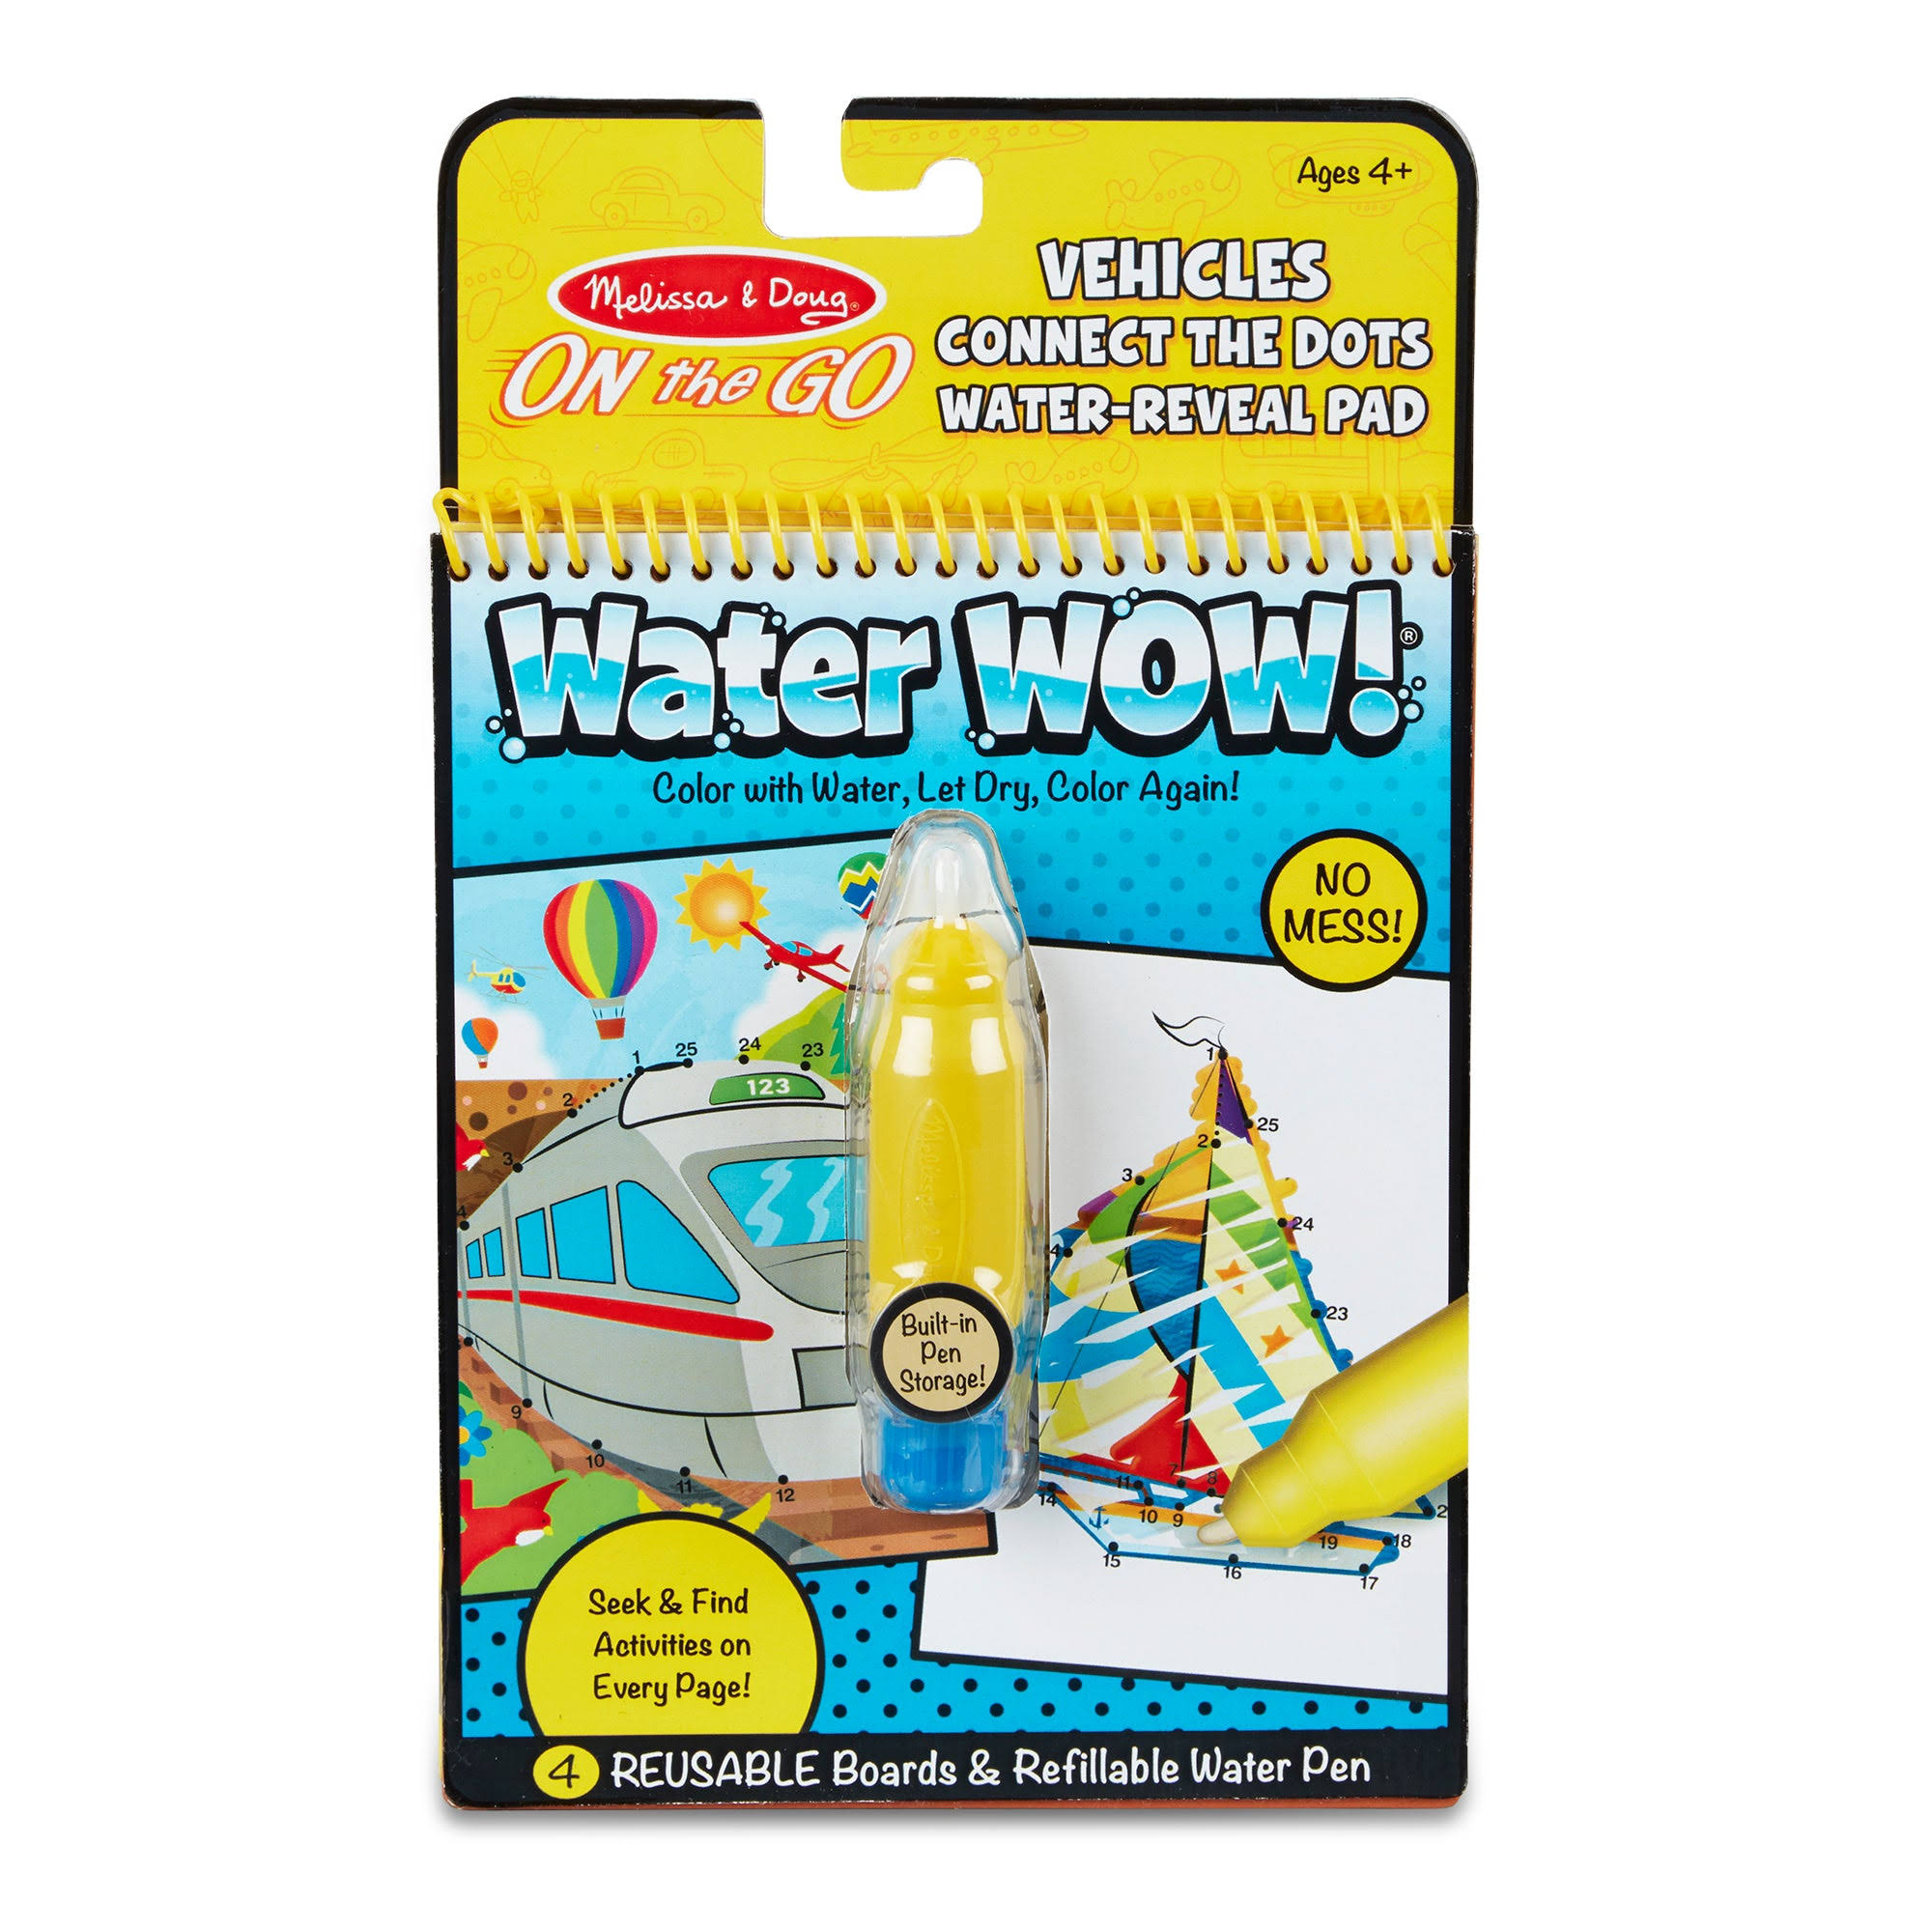 Melissa & Doug Water Wow! Vehicles Connect The Dots